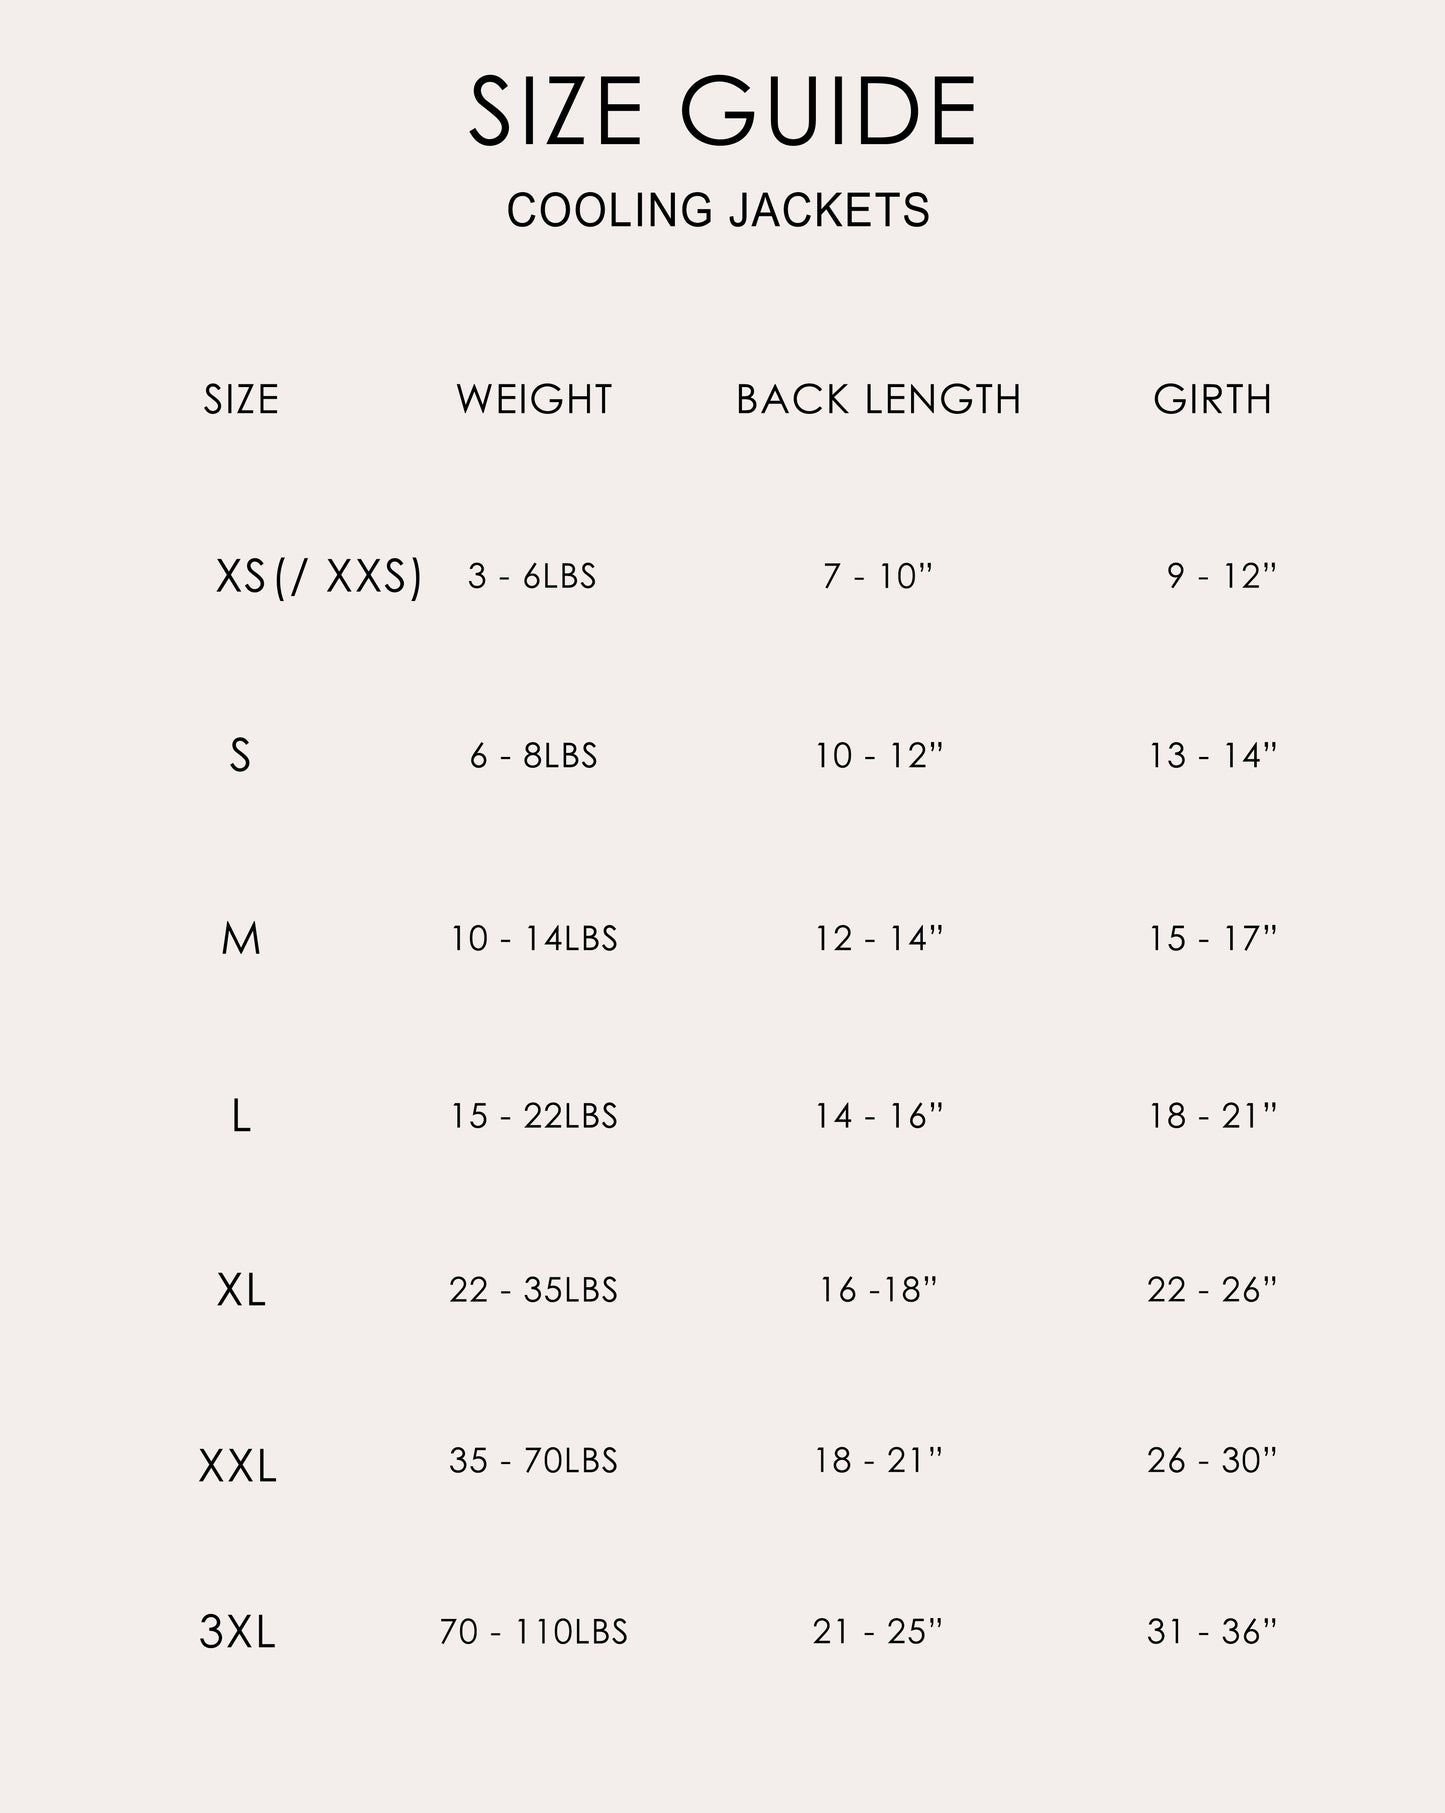 LCB Watermelon Cooling Jacket